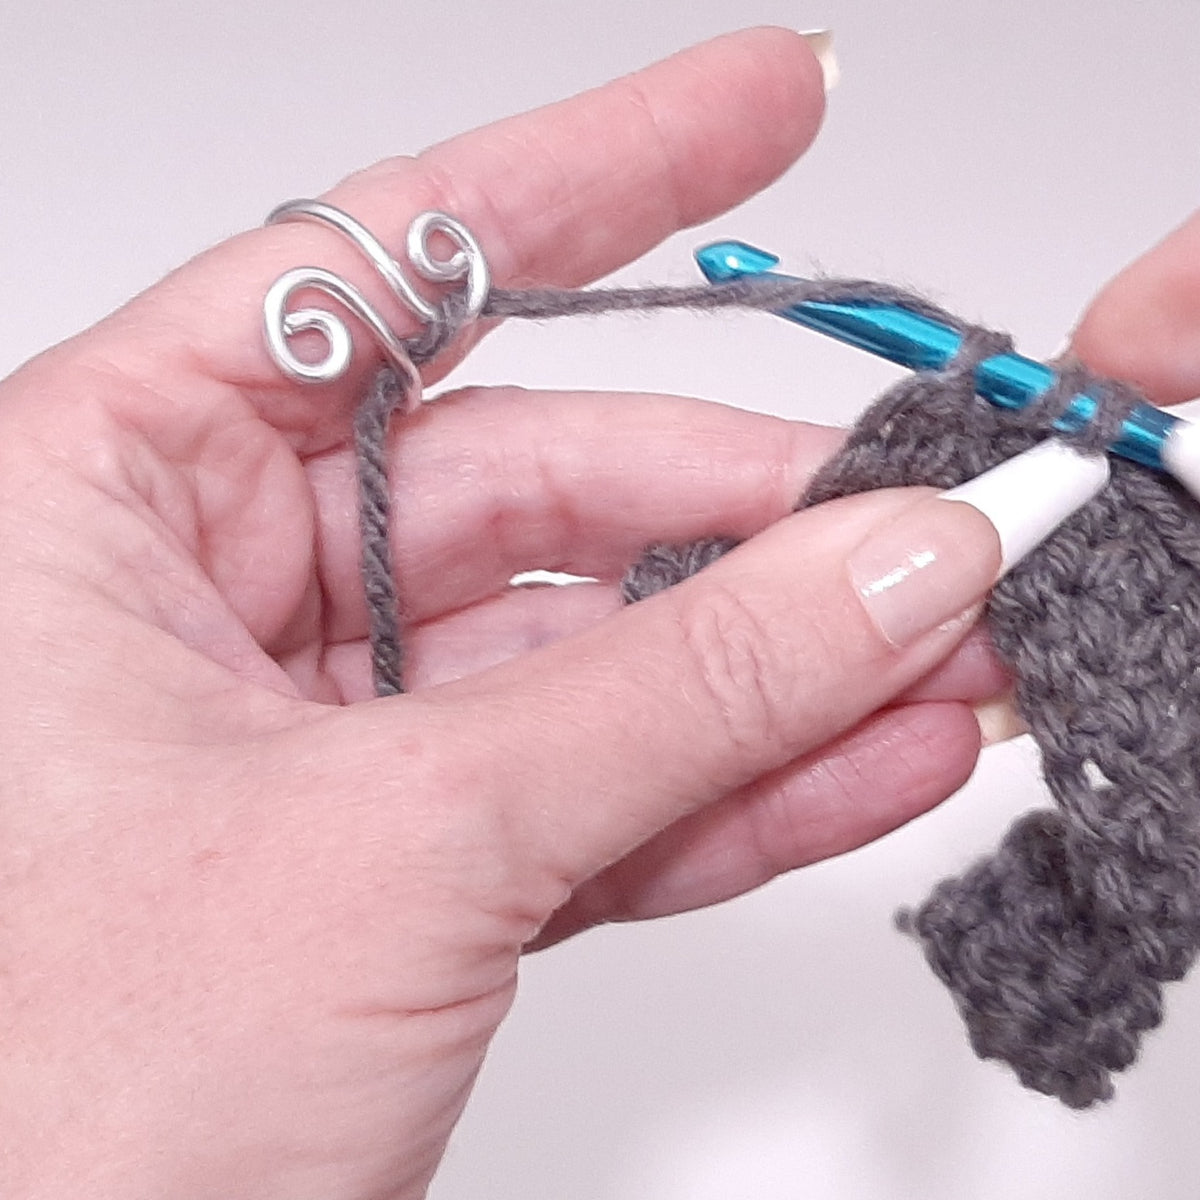 What is a Yarn Tension Ring? – YarnNecklaces